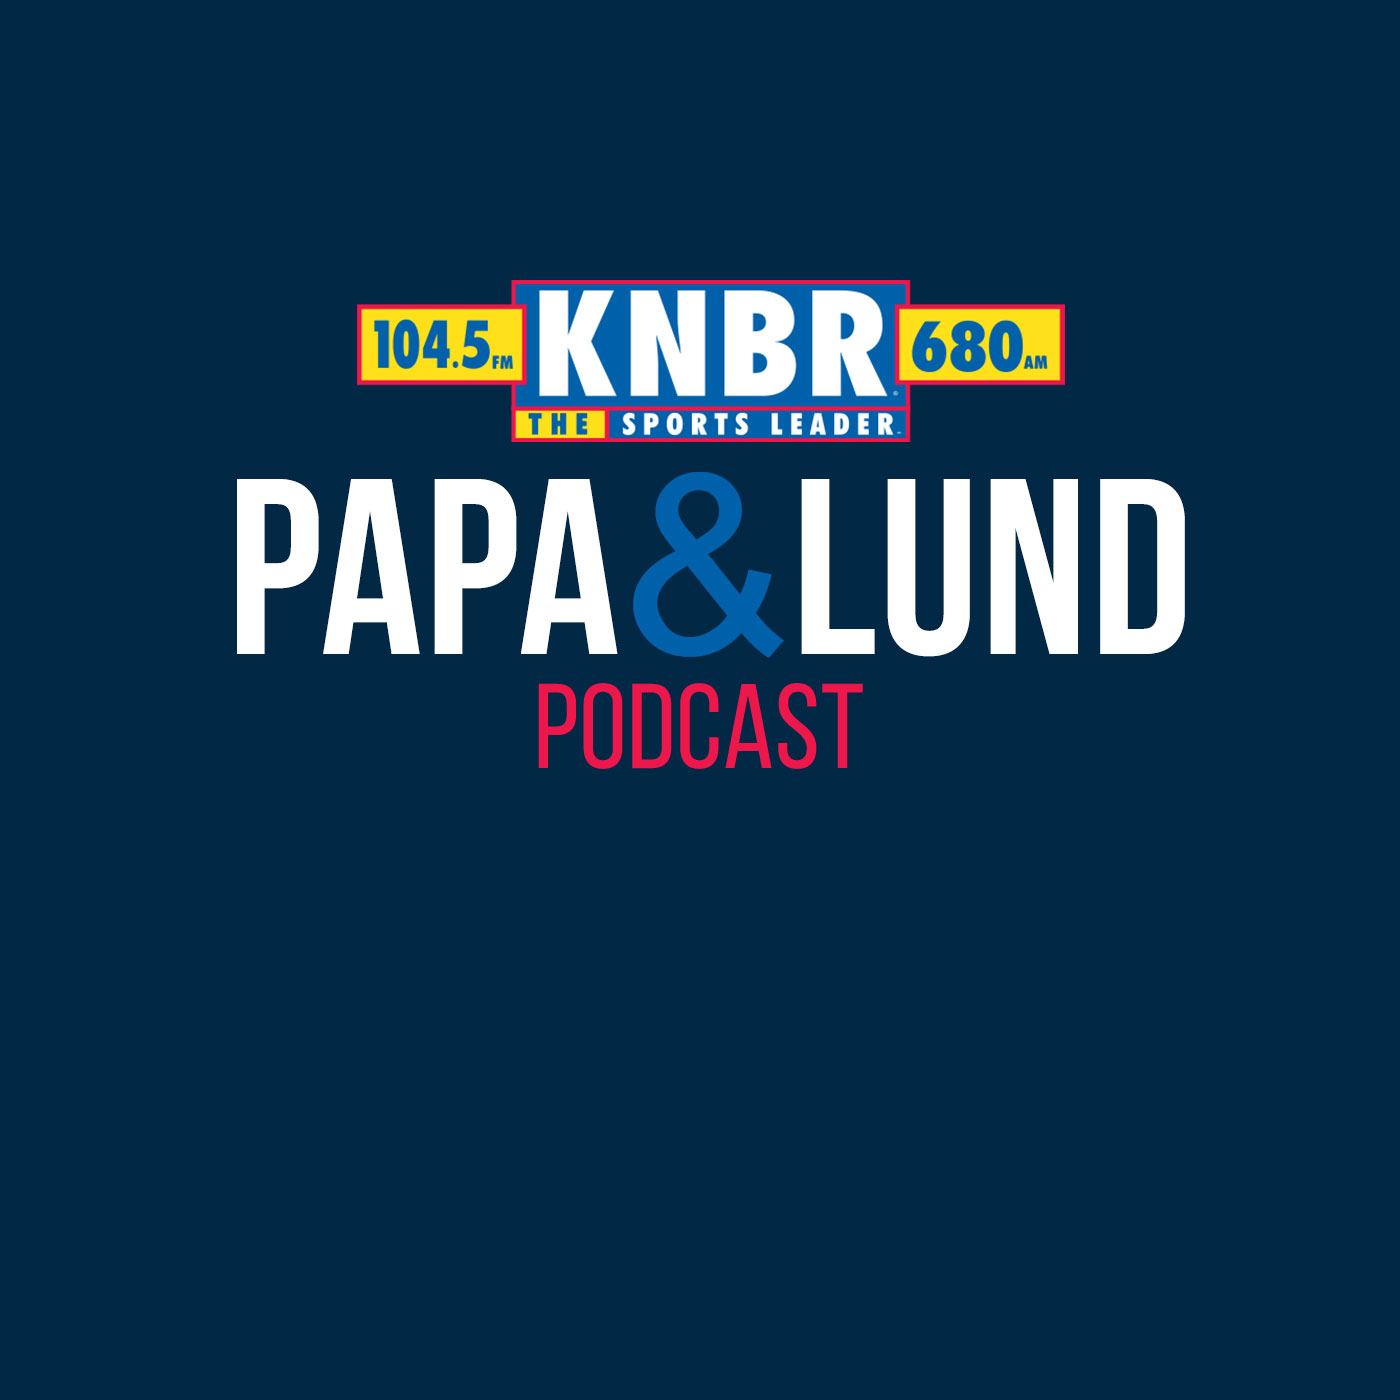 11-15 Monte Poole joins Papa and Lund to provide insight into what he thinks a realistic suspension could be for Draymond Green after last night's scuffle